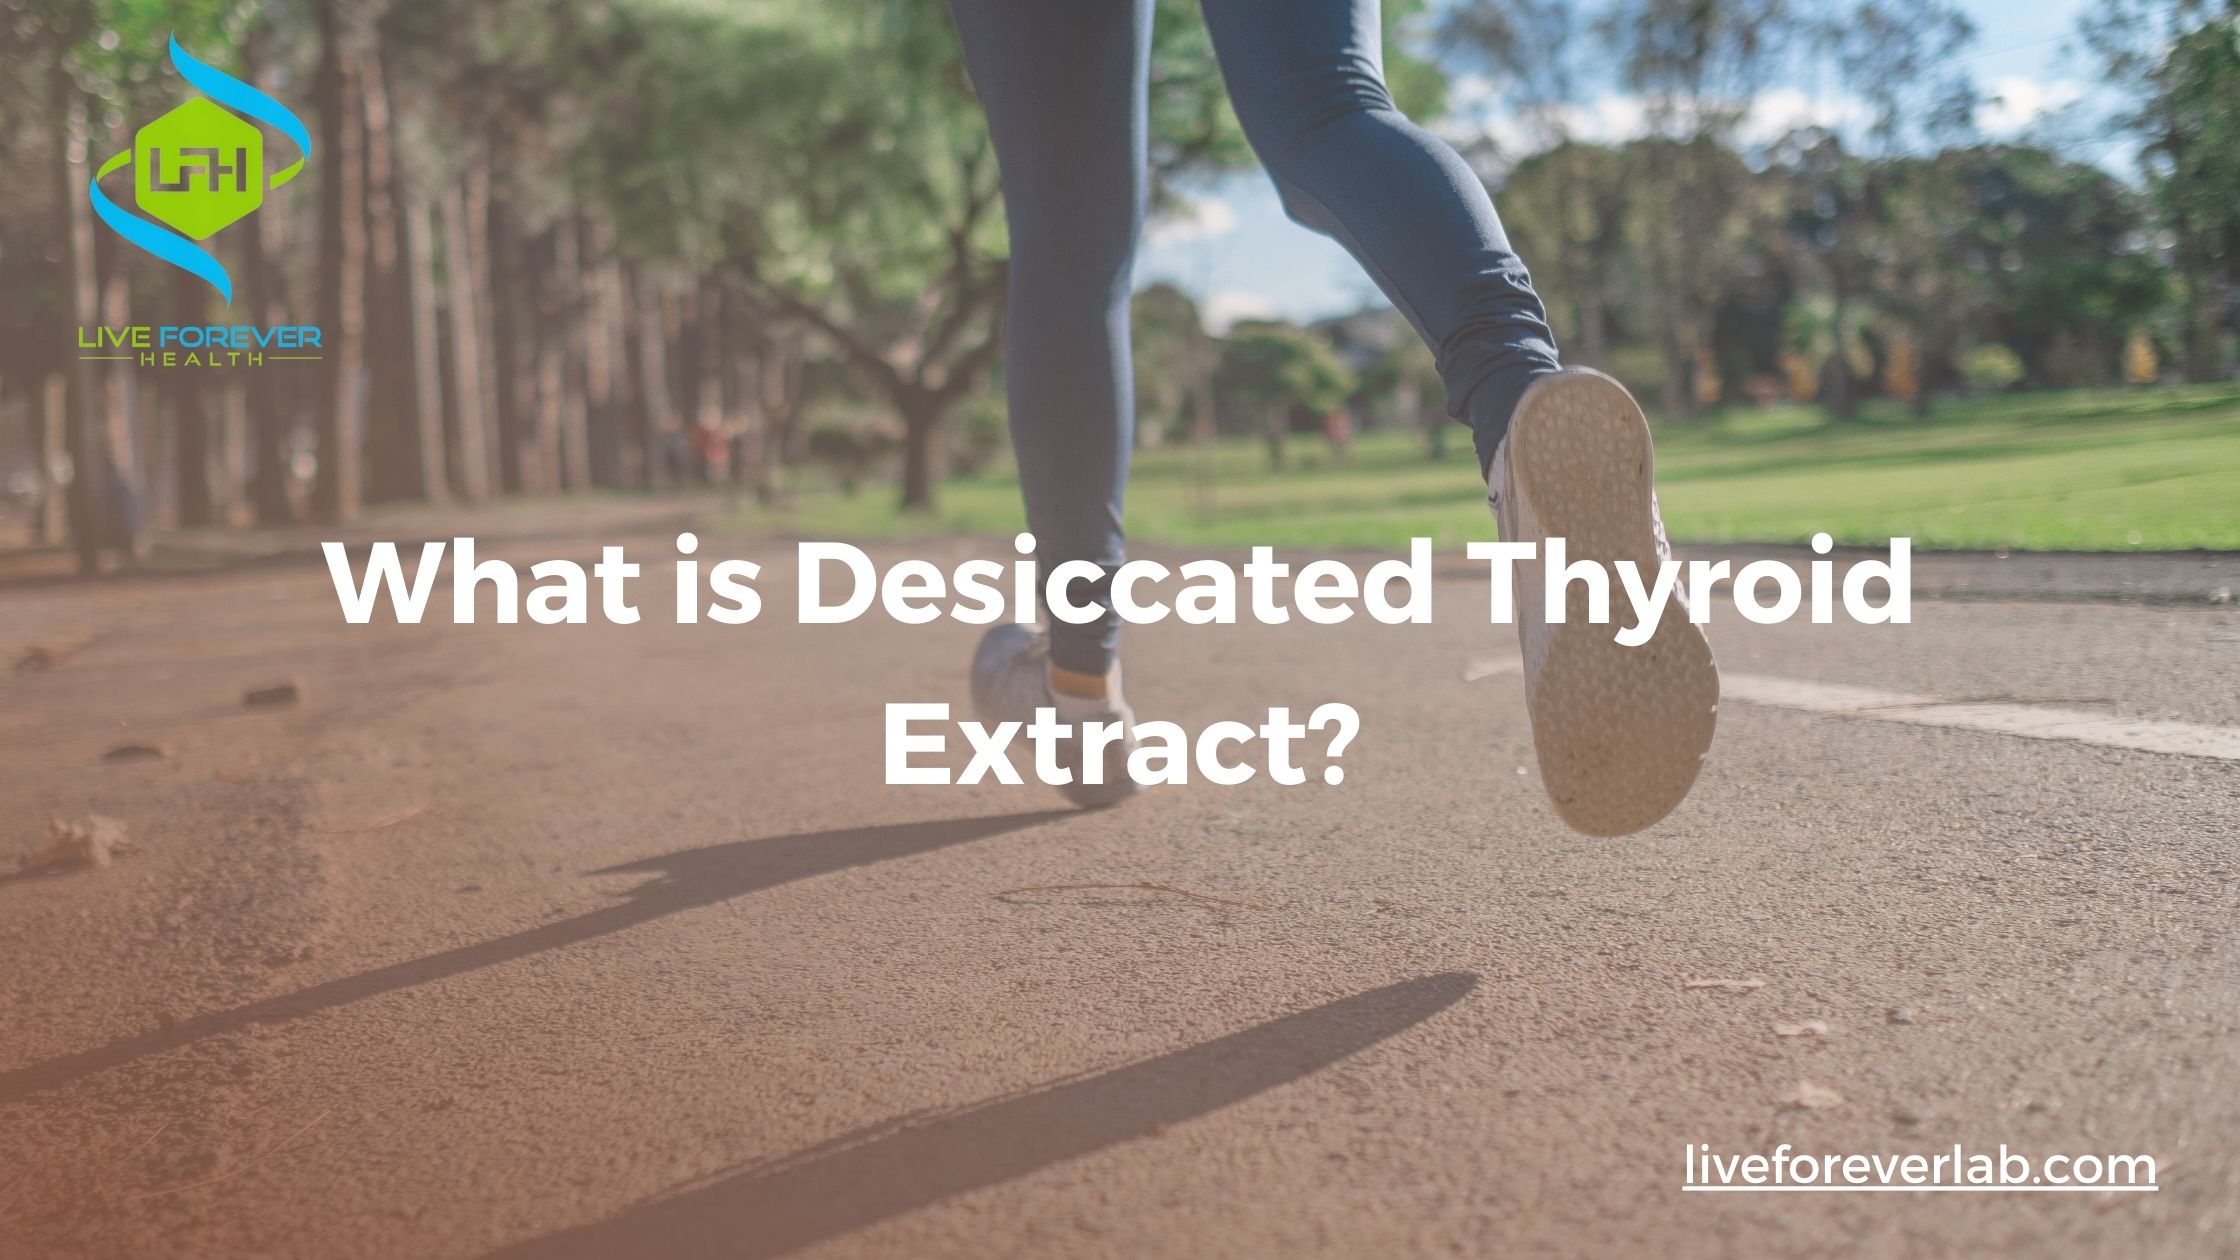 What is Desiccated Thyroid Extract